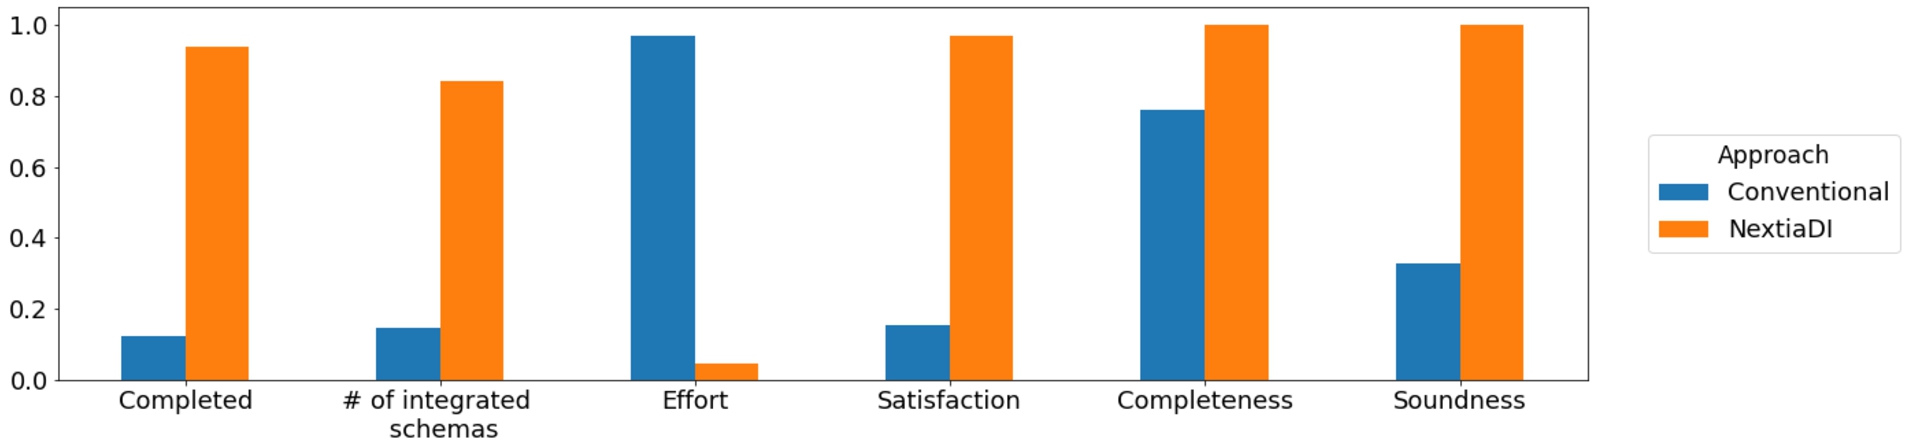 Aggregated results for the schema integration phase. Completed specifies whether participants finished the task within the available time (higher is better). # of integrated schemas denotes how many schema elements participants managed to integrate in the available time (higher is better). Effort specifies perceived effort to complete the task (lower is better). Satisfaction is used to quantify the perceived satisfaction of running the task with each approach (higher is better). Completeness and Soundness refer to the quality metrics previously introduced.